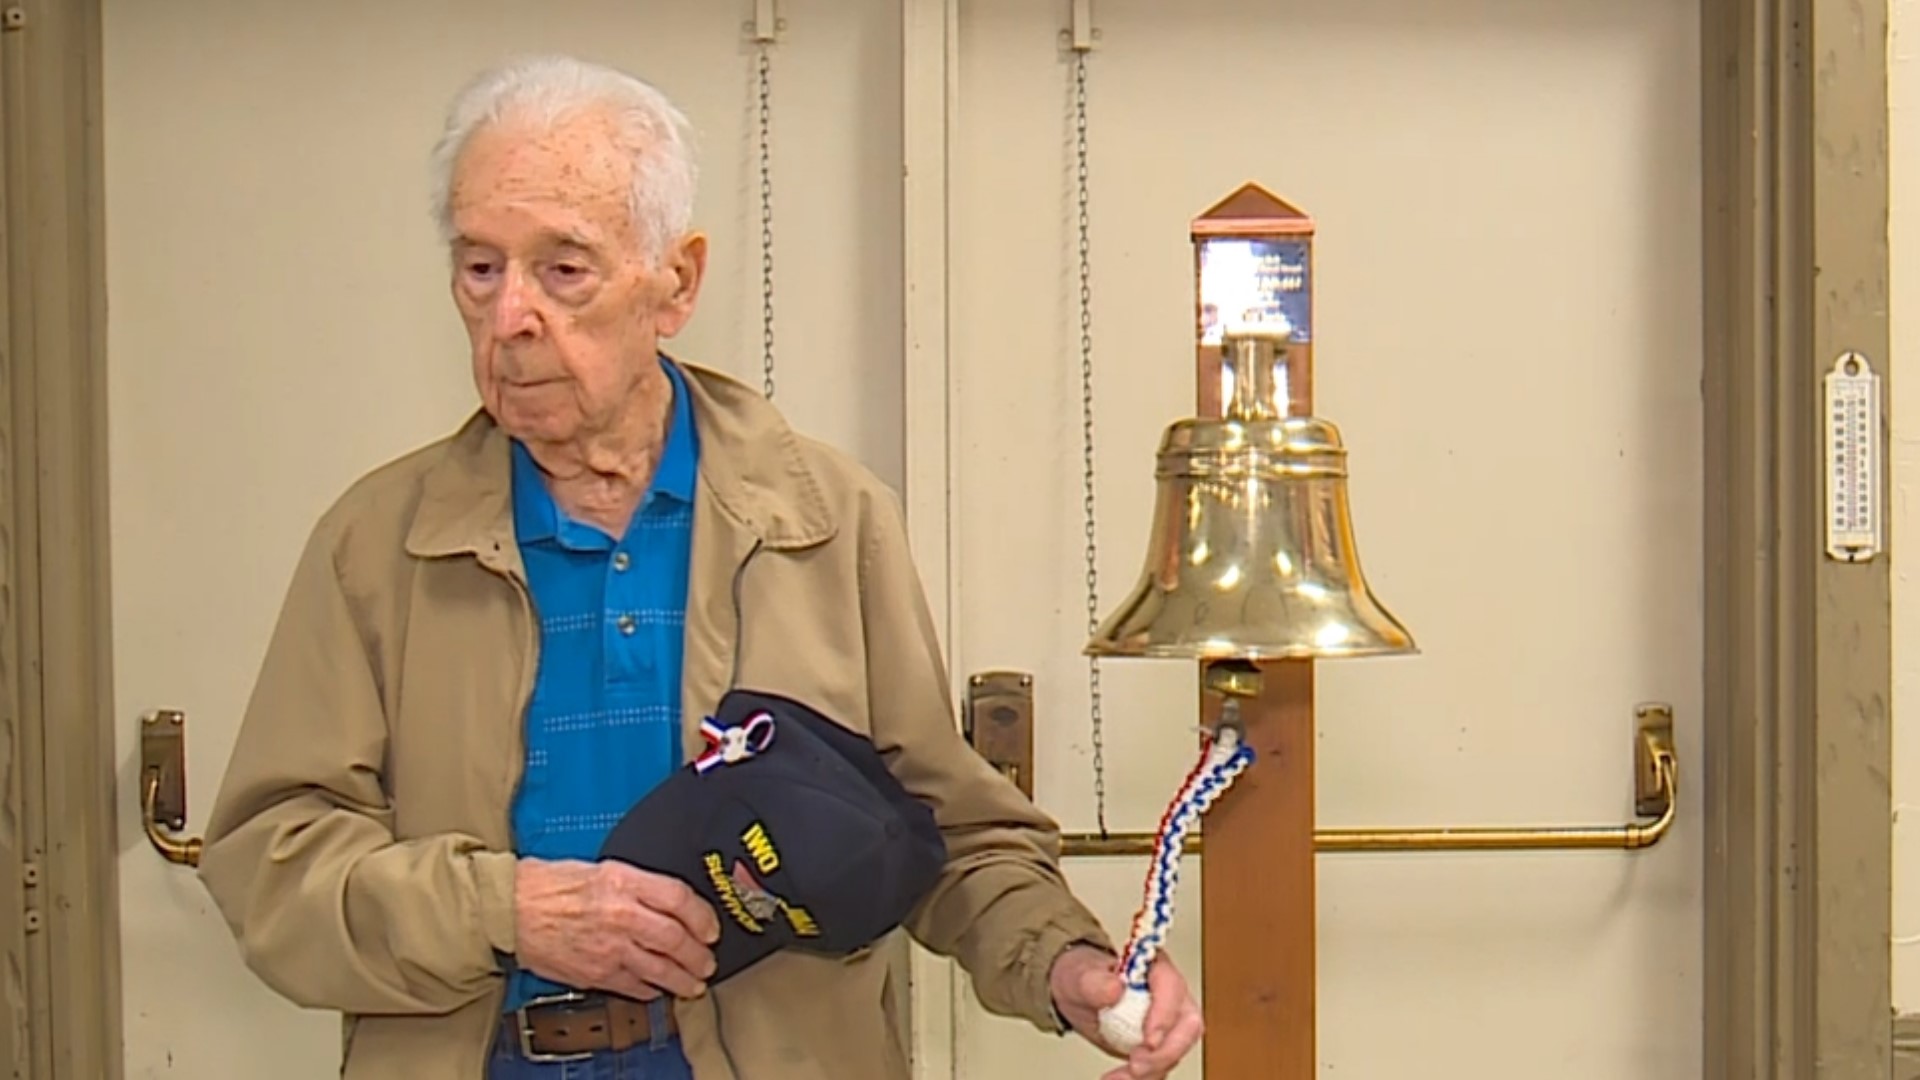 Joe, 98, is a Marine veteran and an Iwo Jima survivor. He got to ring the bell at the American Legion Post 2 in Bristol on Veterans Day.